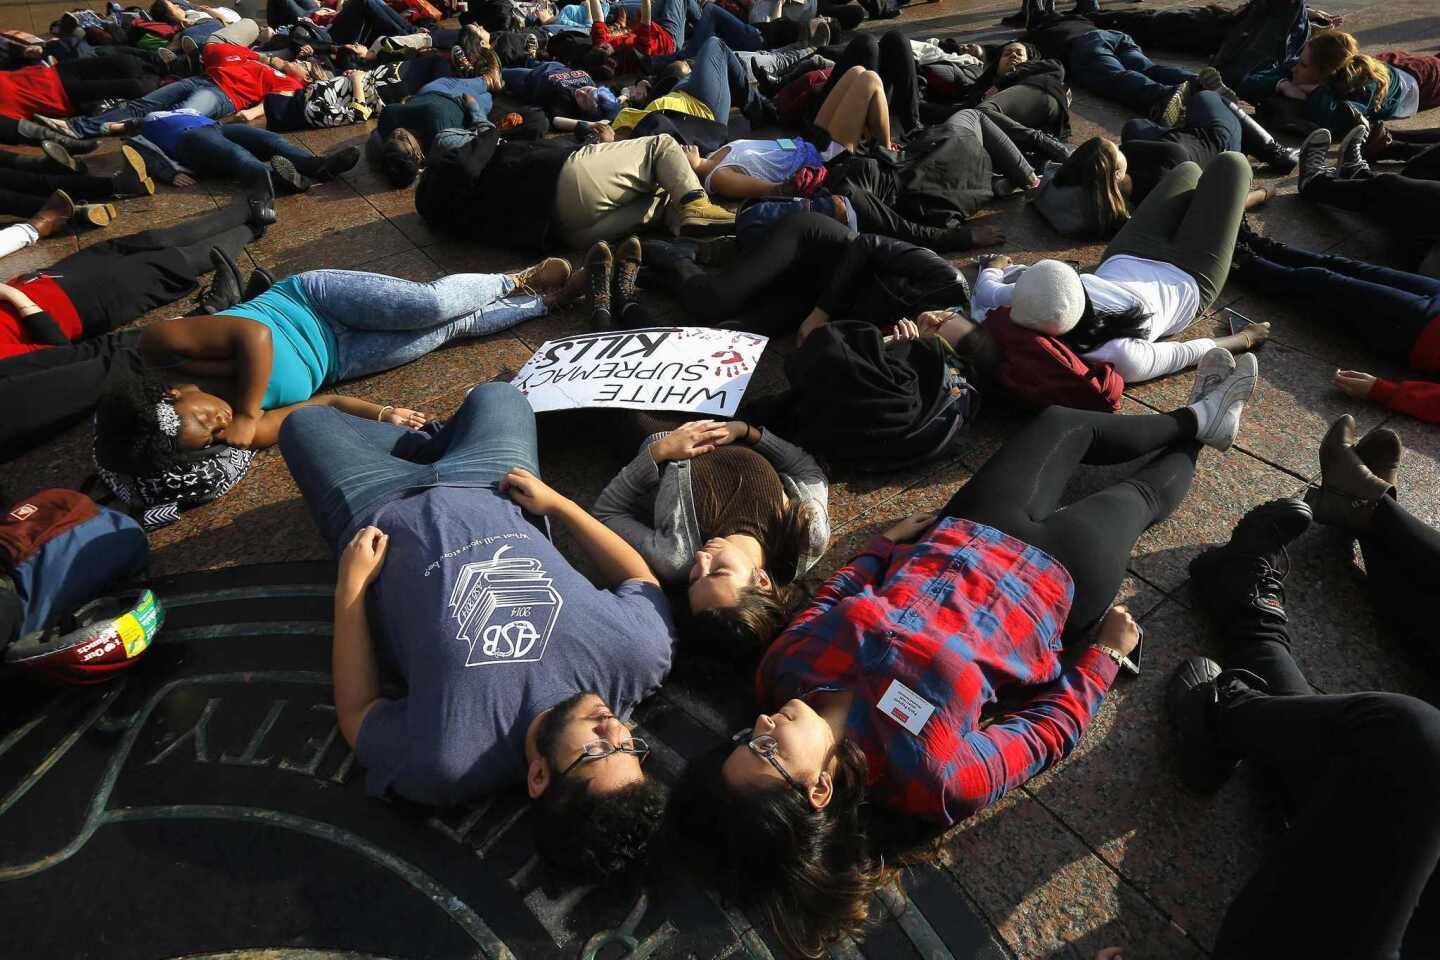 Demonstrators participate in a nationwide "Hands Up, Walk Out" protest Dec. 1 at Boston University.